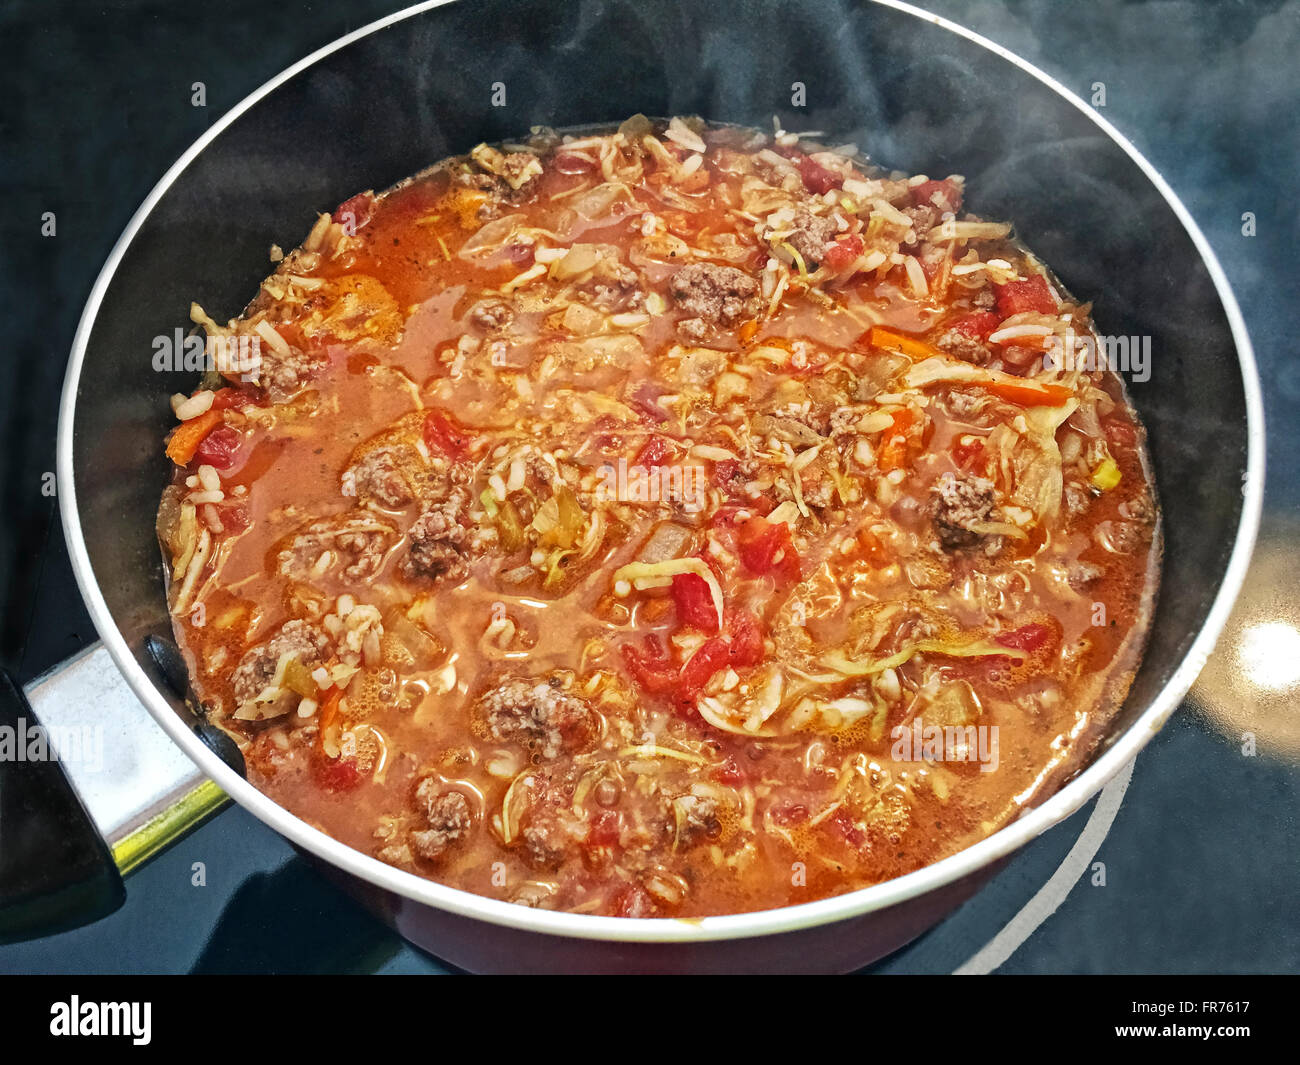 https://c8.alamy.com/comp/FR7617/goulash-cooking-on-the-stove-top-with-steam-rising-from-the-pot-FR7617.jpg